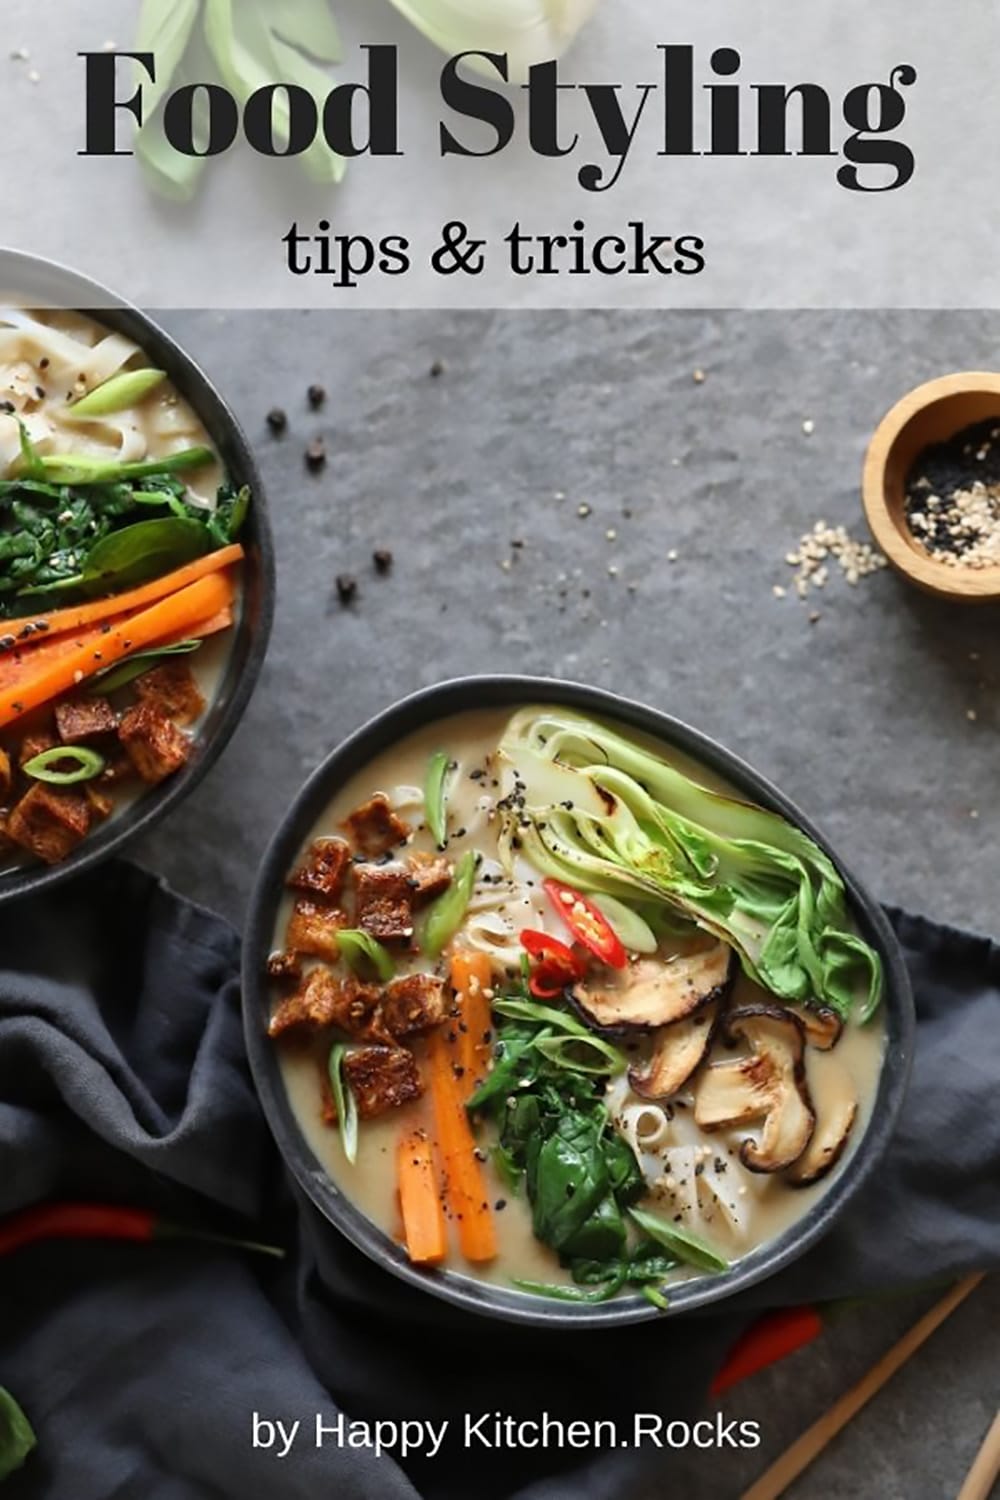 Food Styling Tips and Tricks Cover.